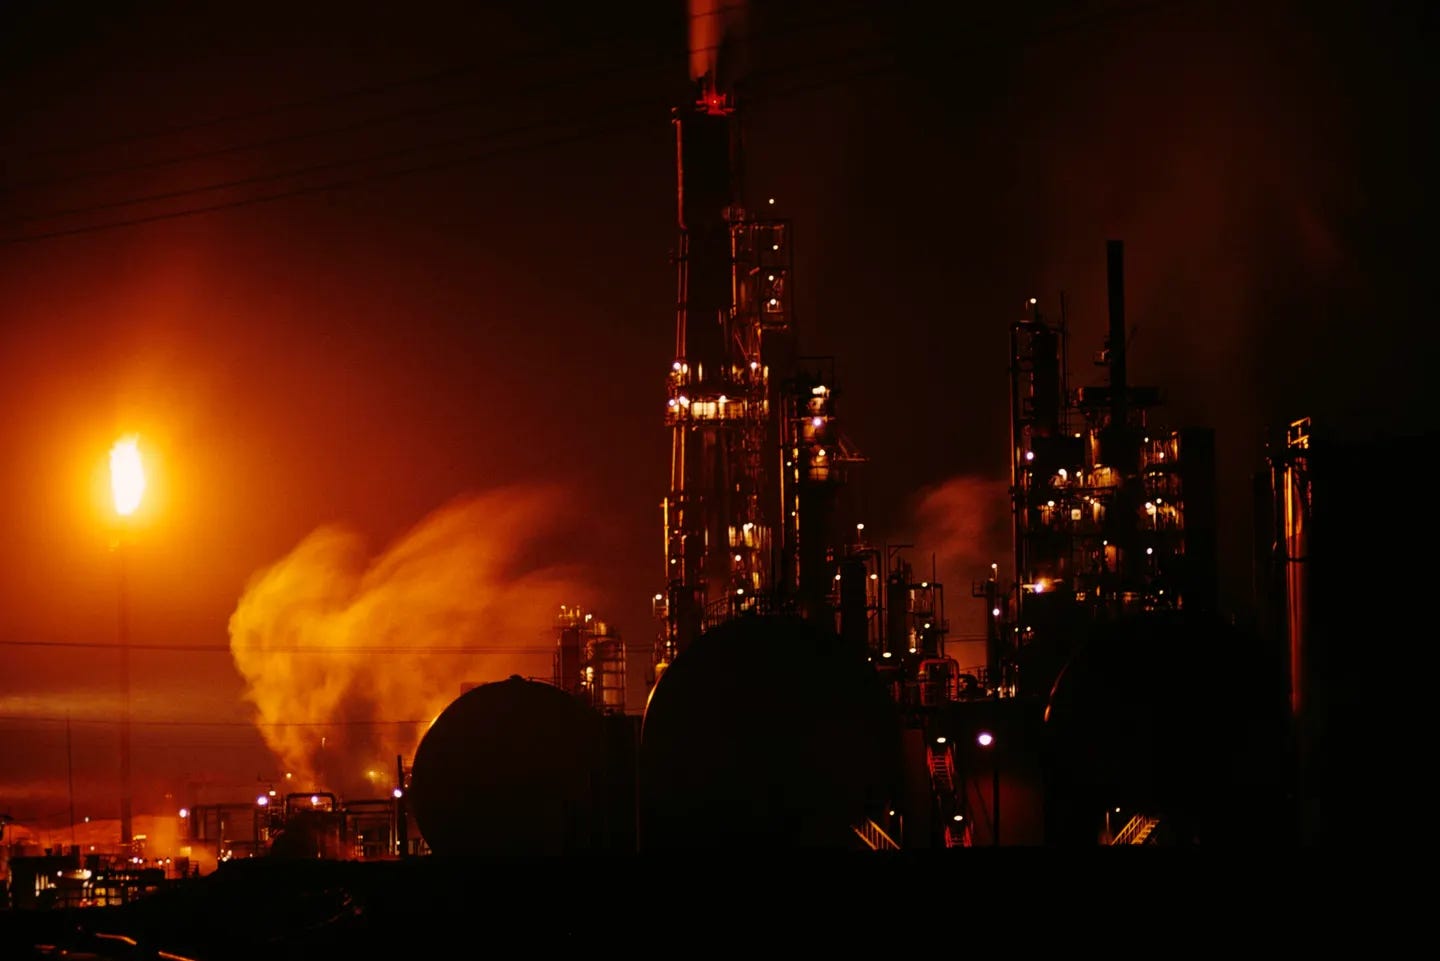 Smoke billows from an oil refinery in the Permian Basin at night, with a gas flare lighting up the scene.